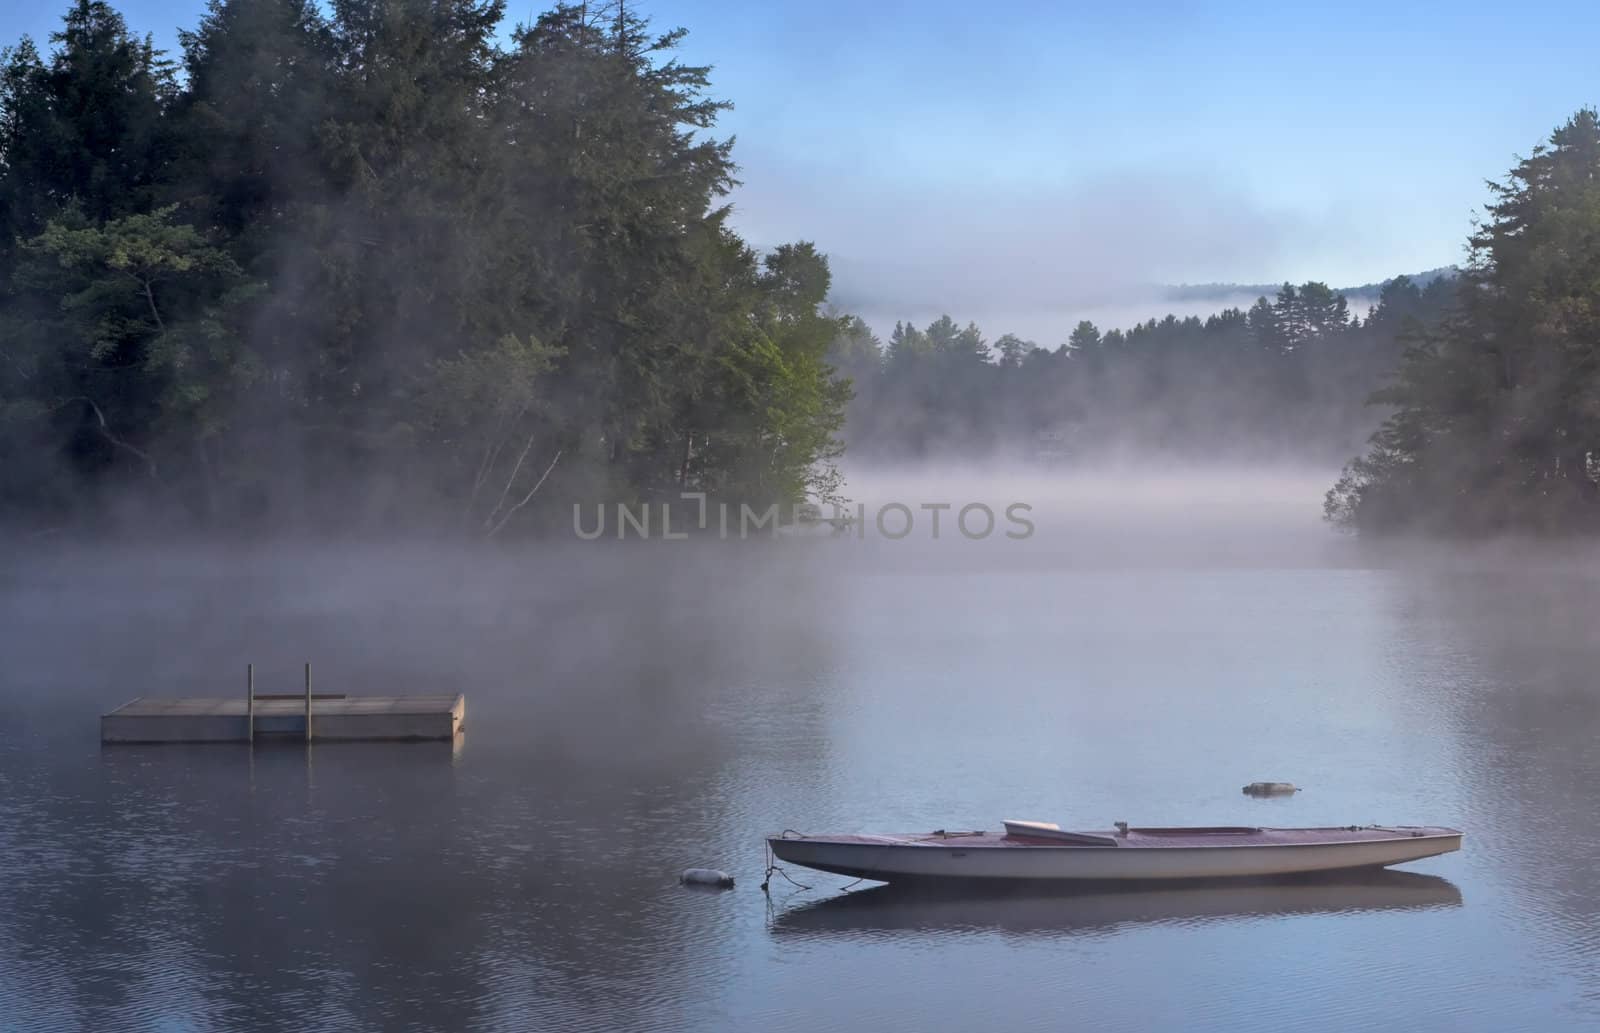 Early morning fog on a lake. A boat and dock are in the foreground.